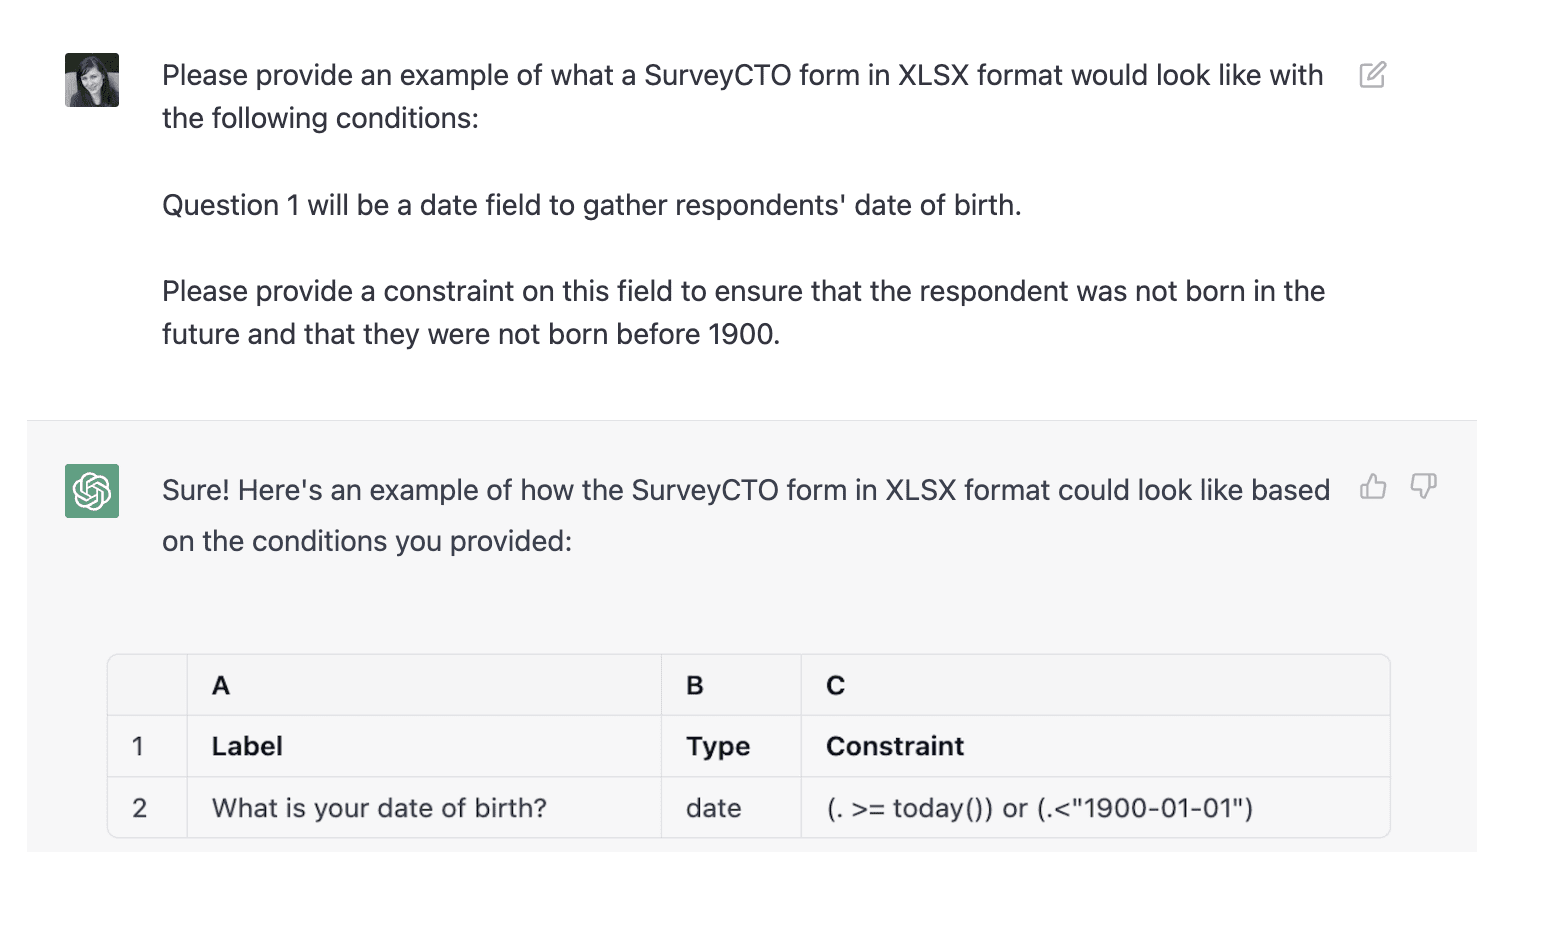 SurveyCTO asks for a form in XLSX with the 1st question asking for date of birth with the constraint to ensure the respondent wasn't born before 1990 or in the future. The bot responds with the the question and the constraint as an or question. 